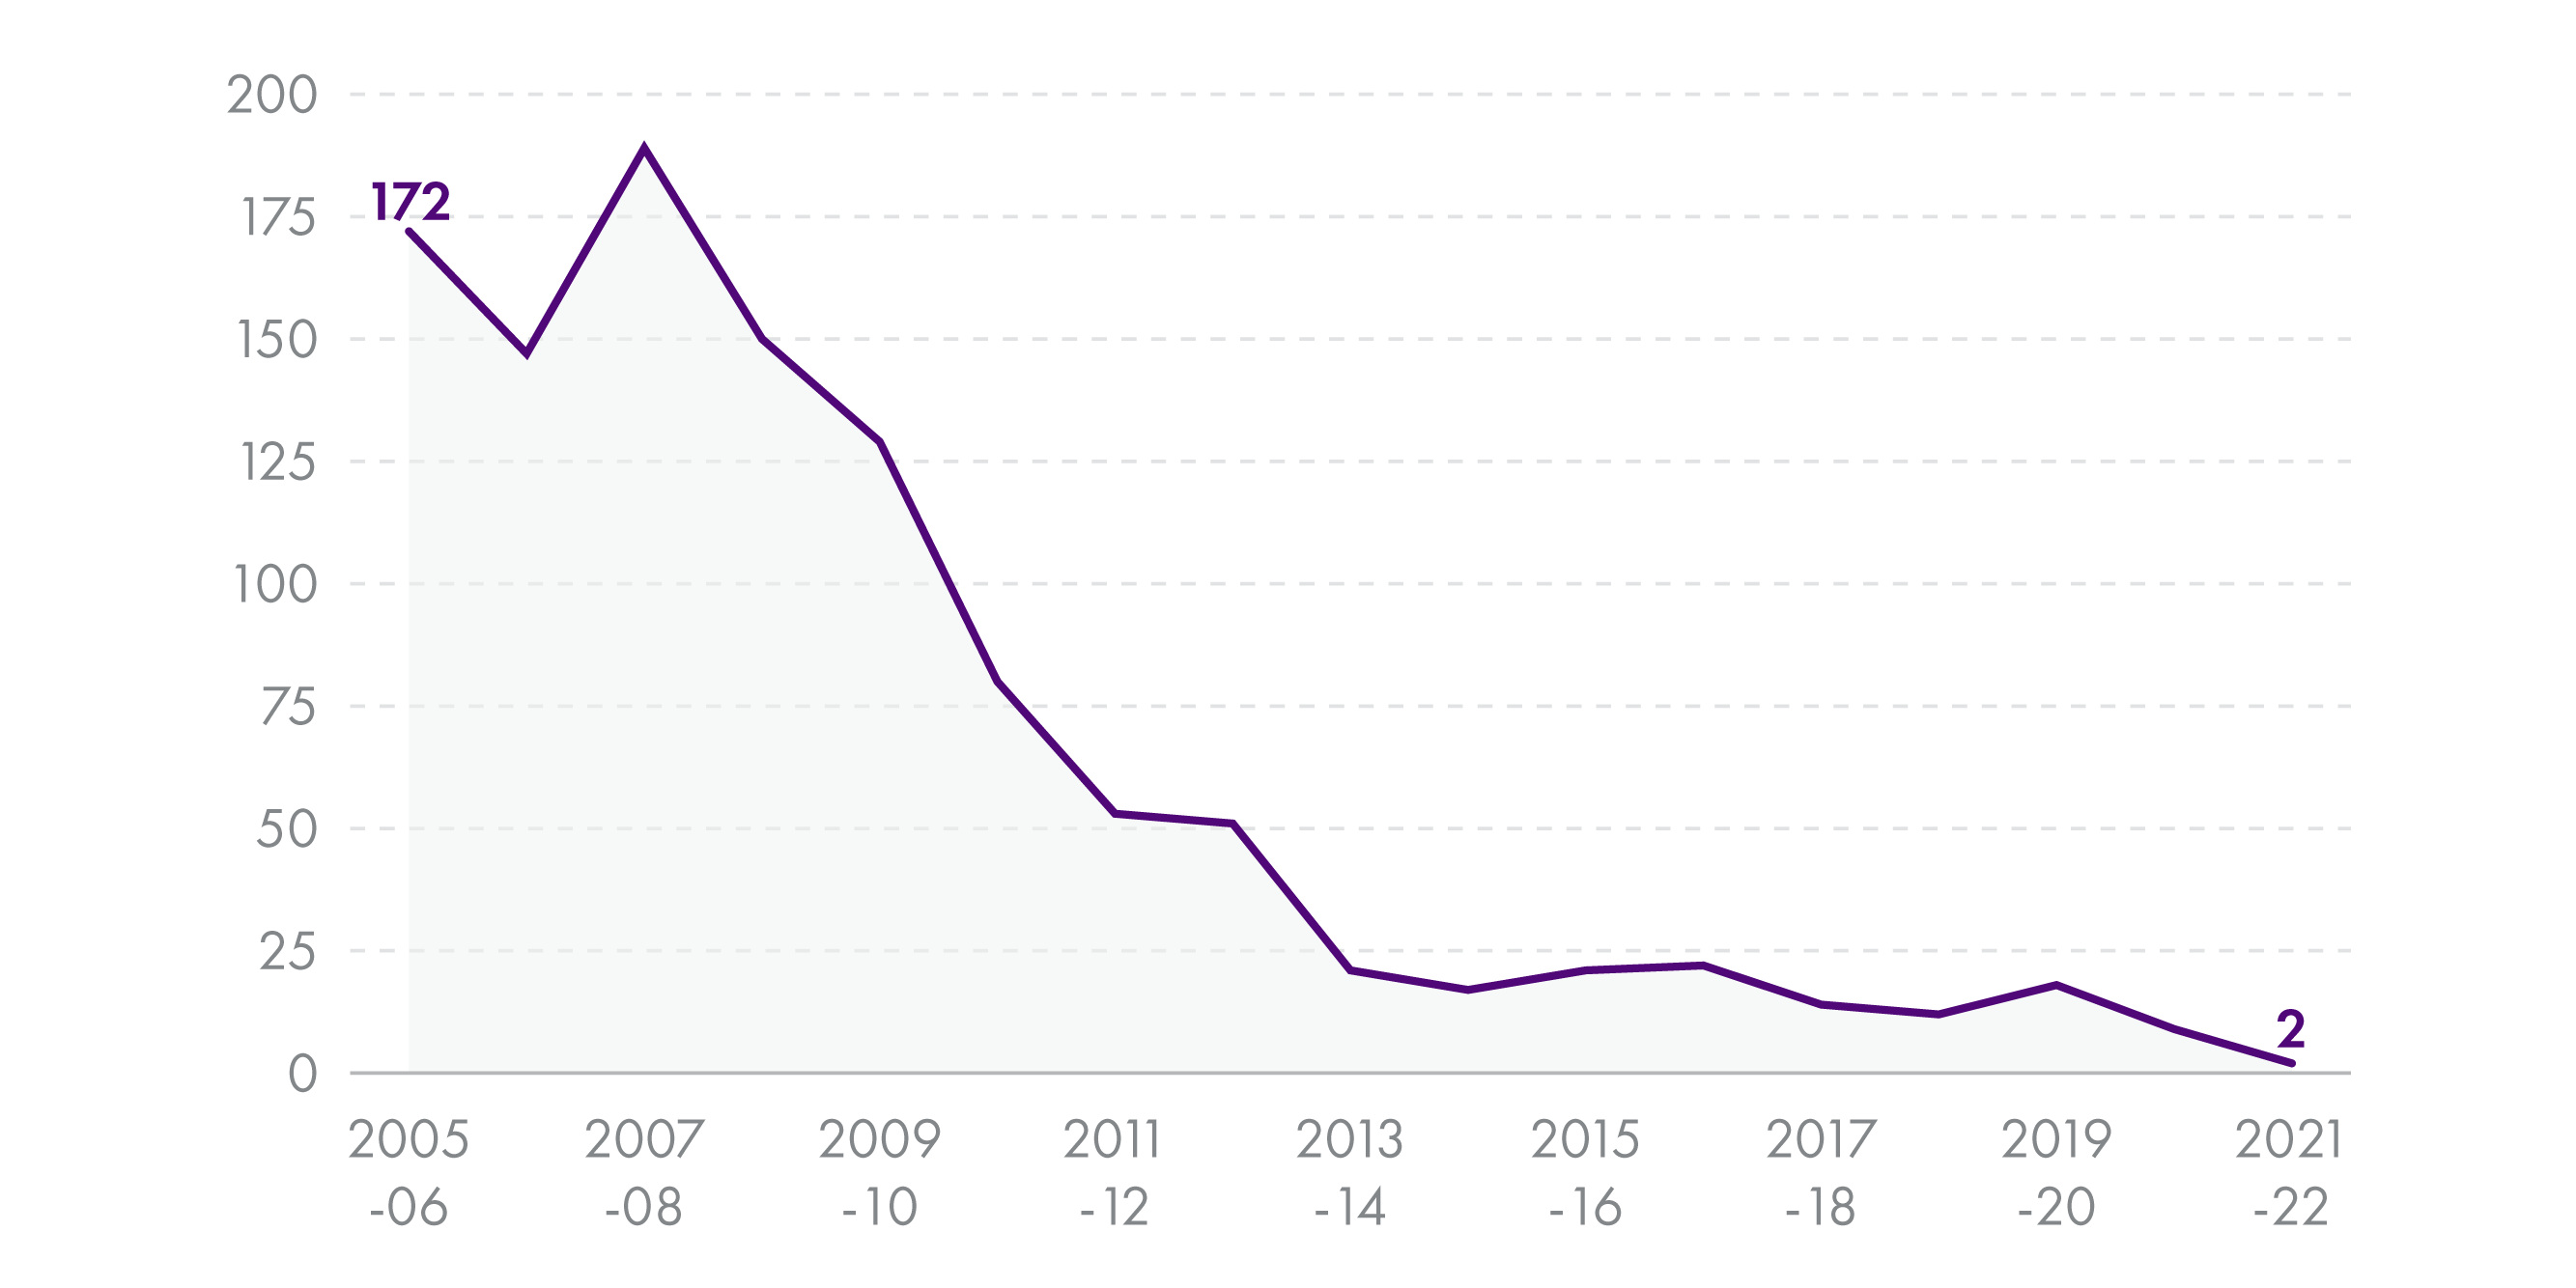 Line graph showing the number of proceedings against children under the age of 16 in the criminal courts has fallen from 172 in 2005-06 to 2 in 2021-22.